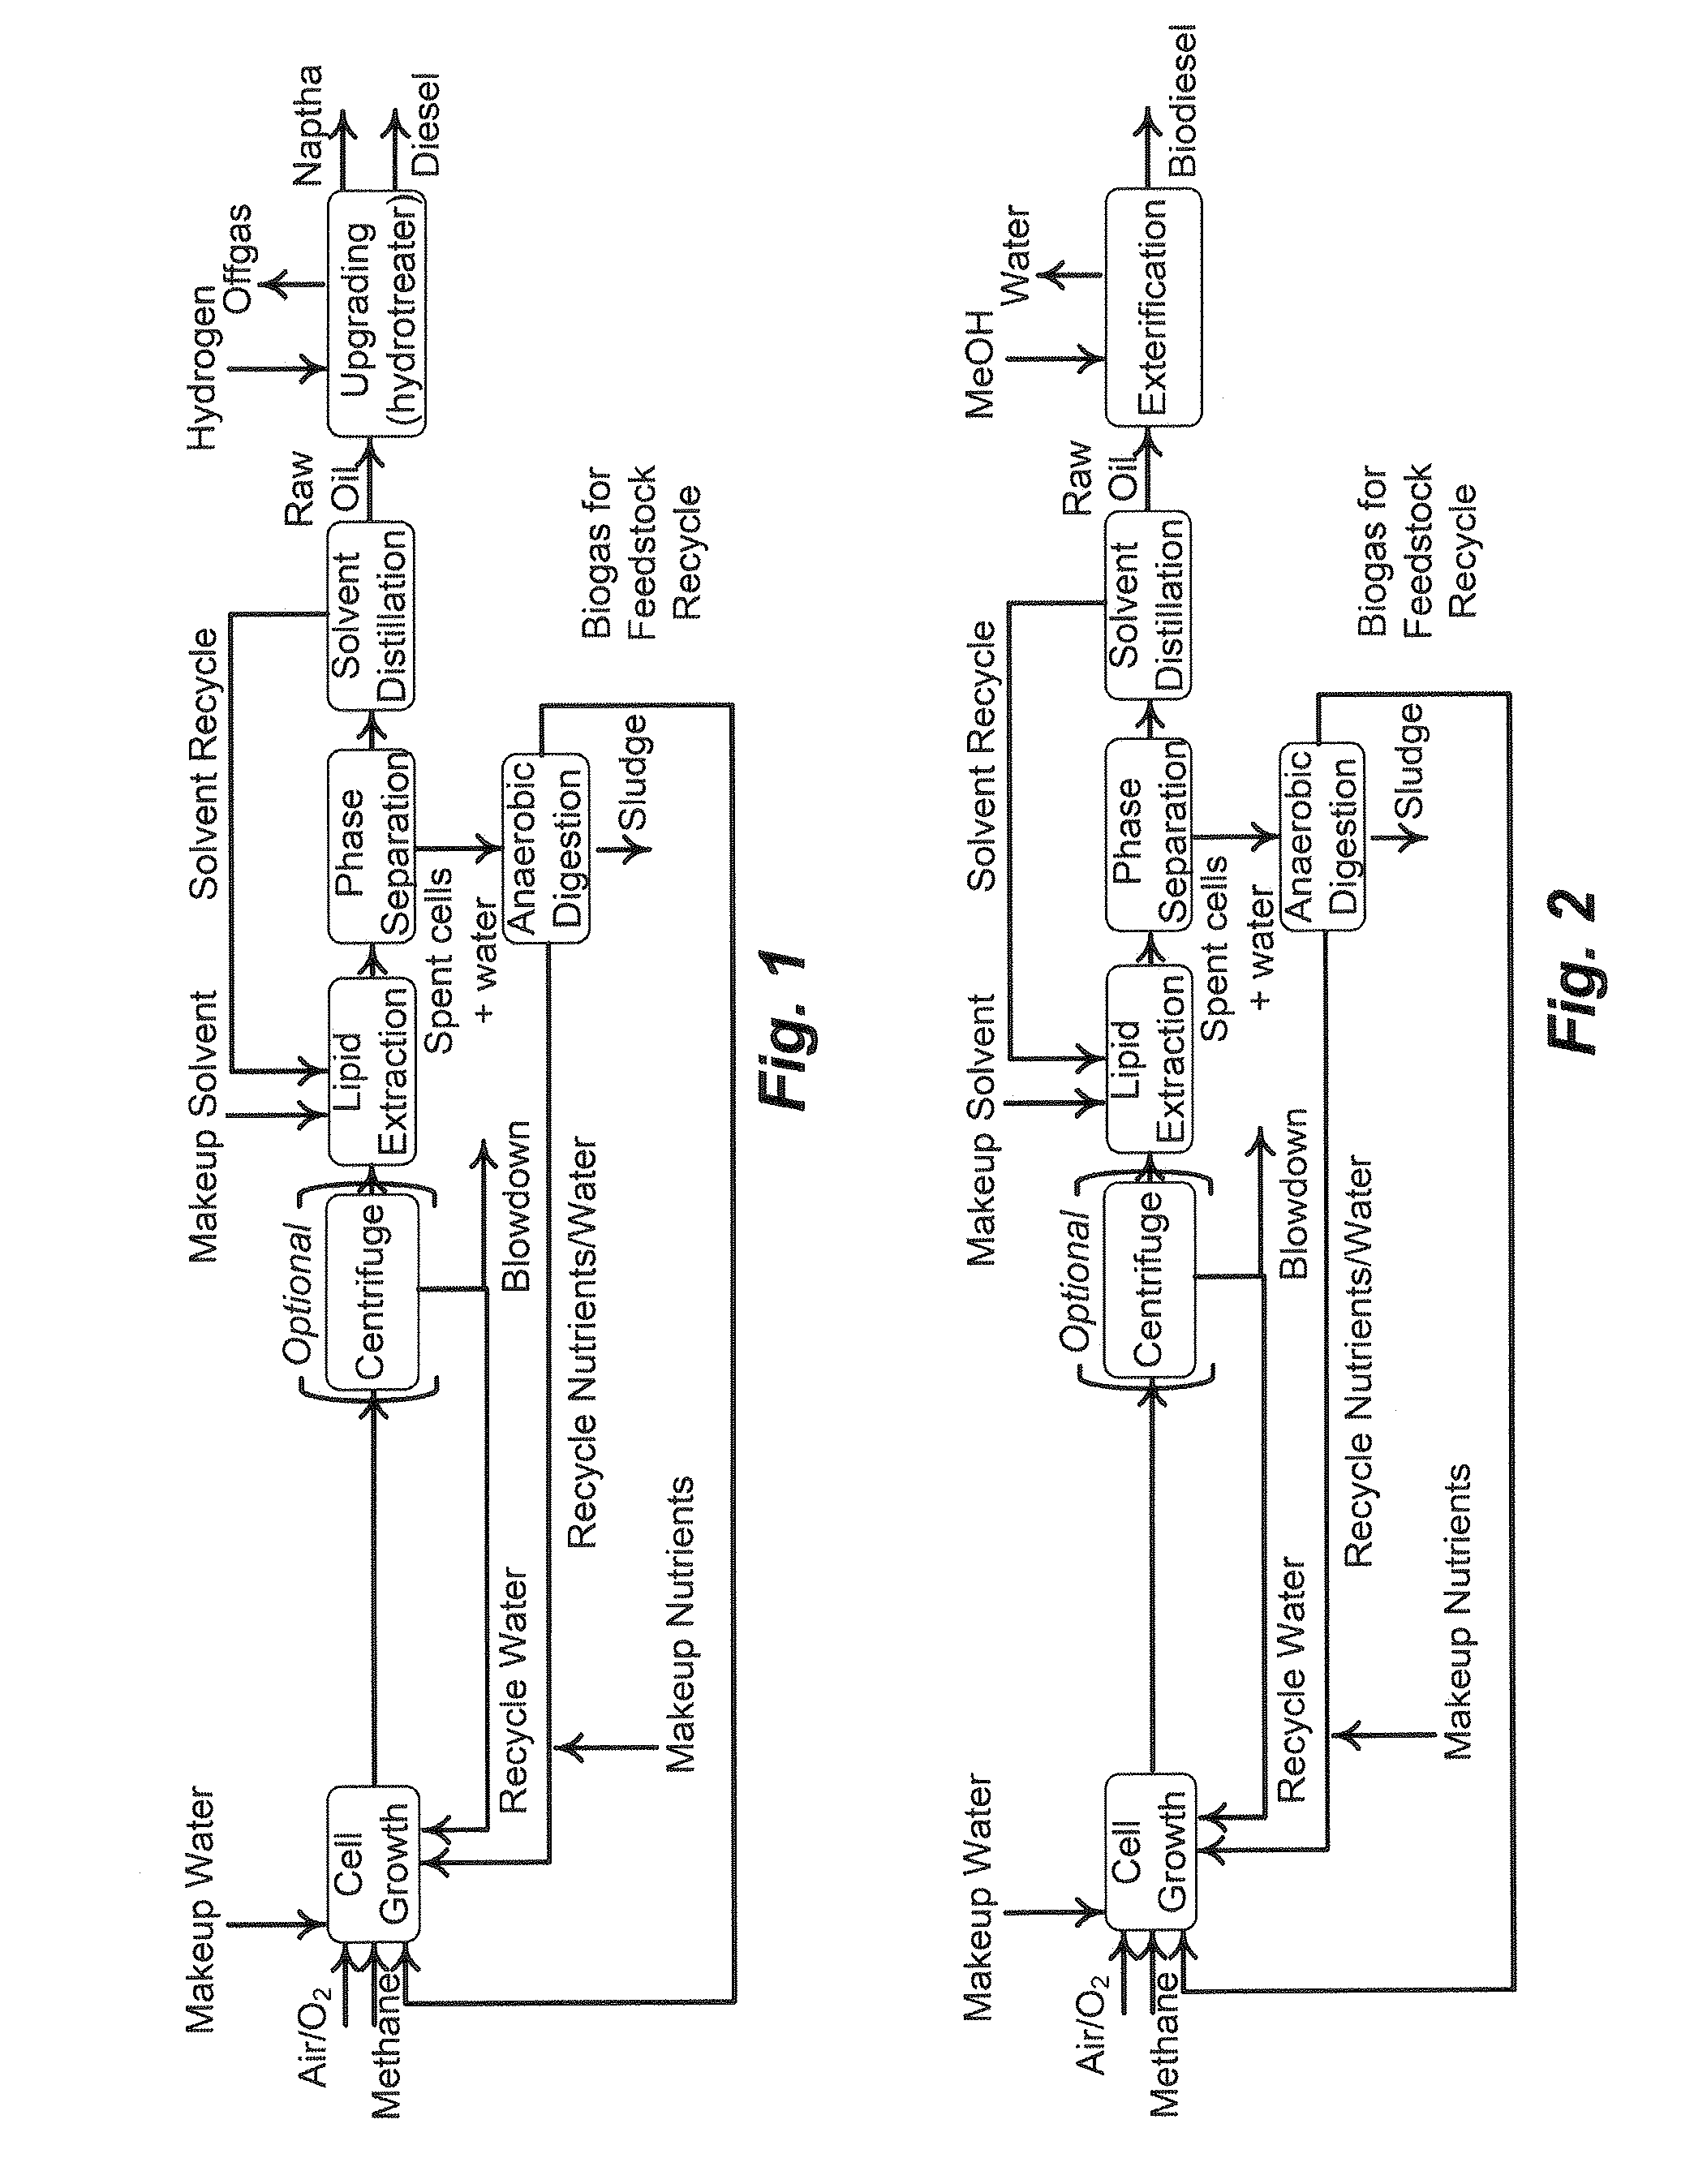 Biorefinery system, methods and compositions thereof